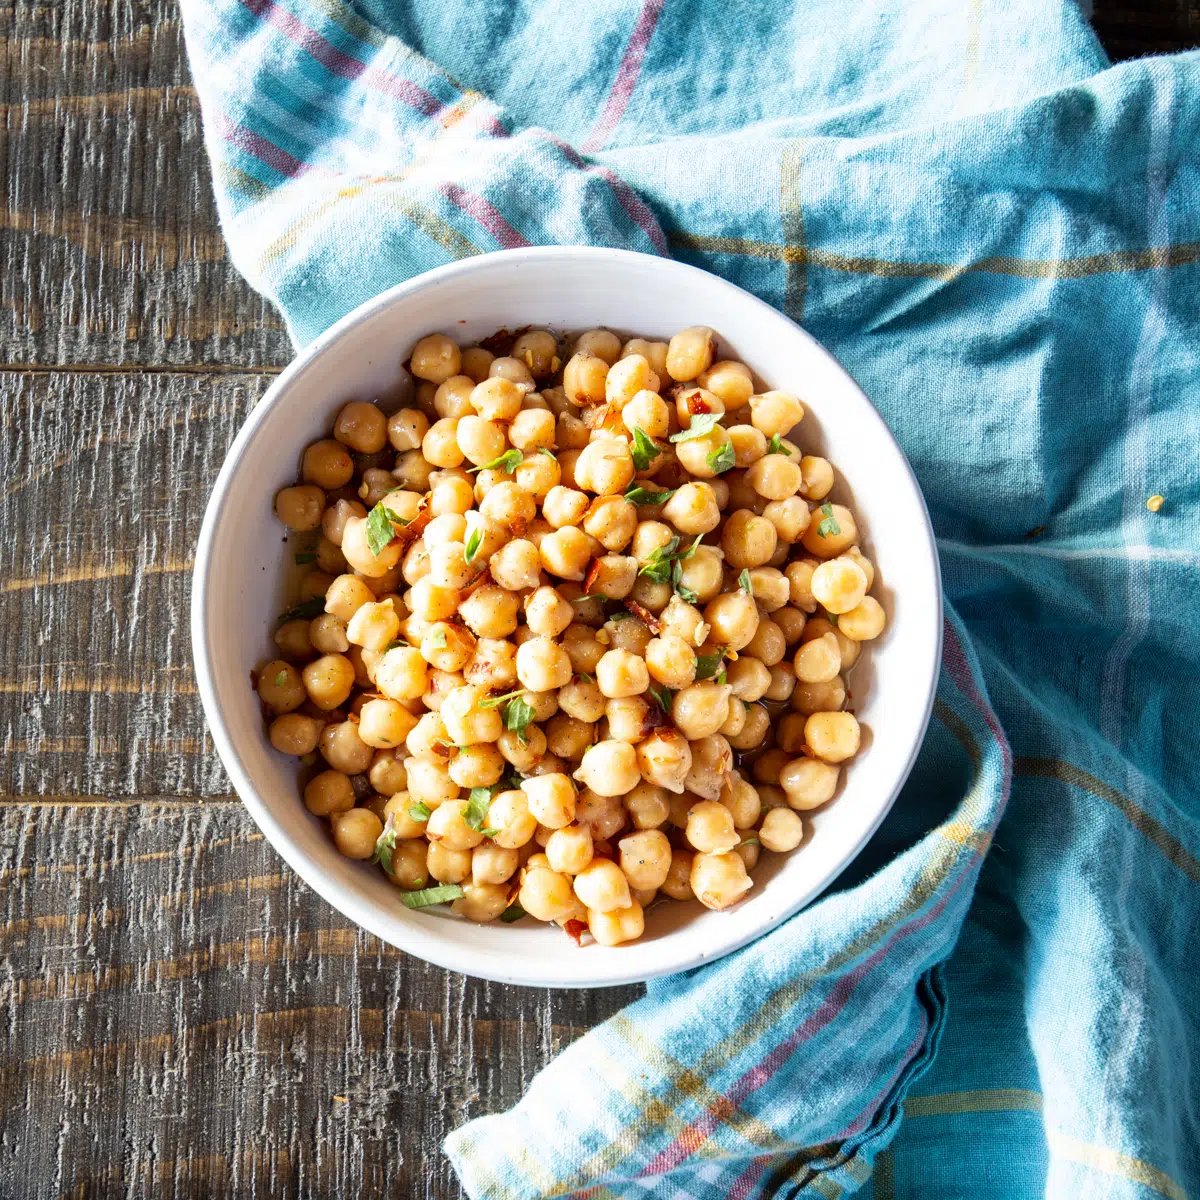 A bowl full of cooked chickpeas, with a few herbs scattered over the top.